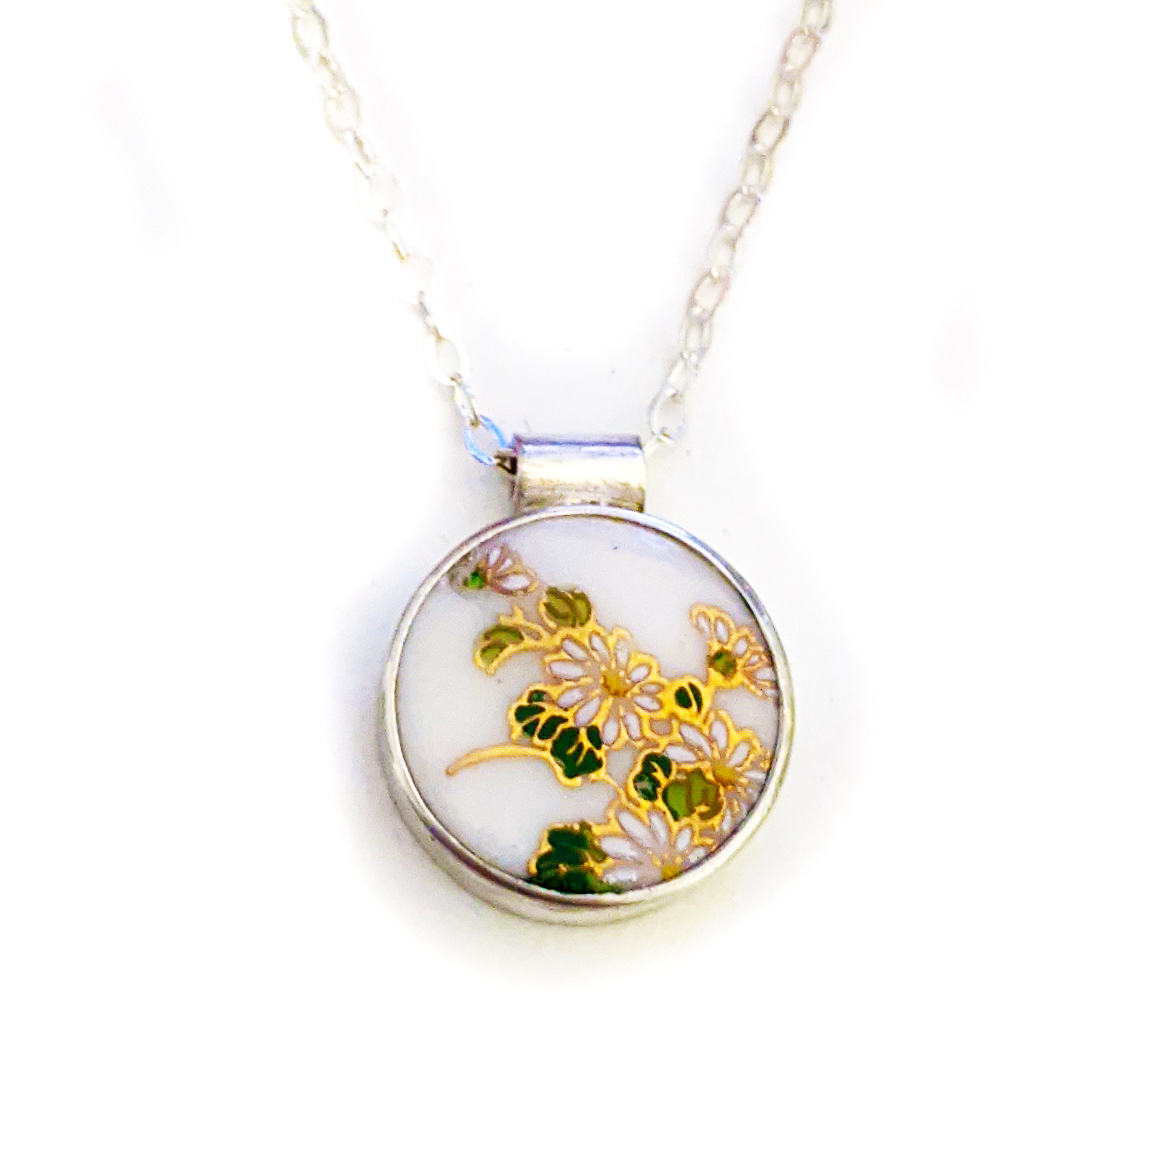 Ceramic artist and china painter Melanie Sherman creates beautiful sterling silver jewelry pieces with porcelain stones. Decorated with vintage decals from Europe and Japan, these one-of-kind pieces tell the story of historic porcelain wares, used as dinnerware in 18th century Europe.